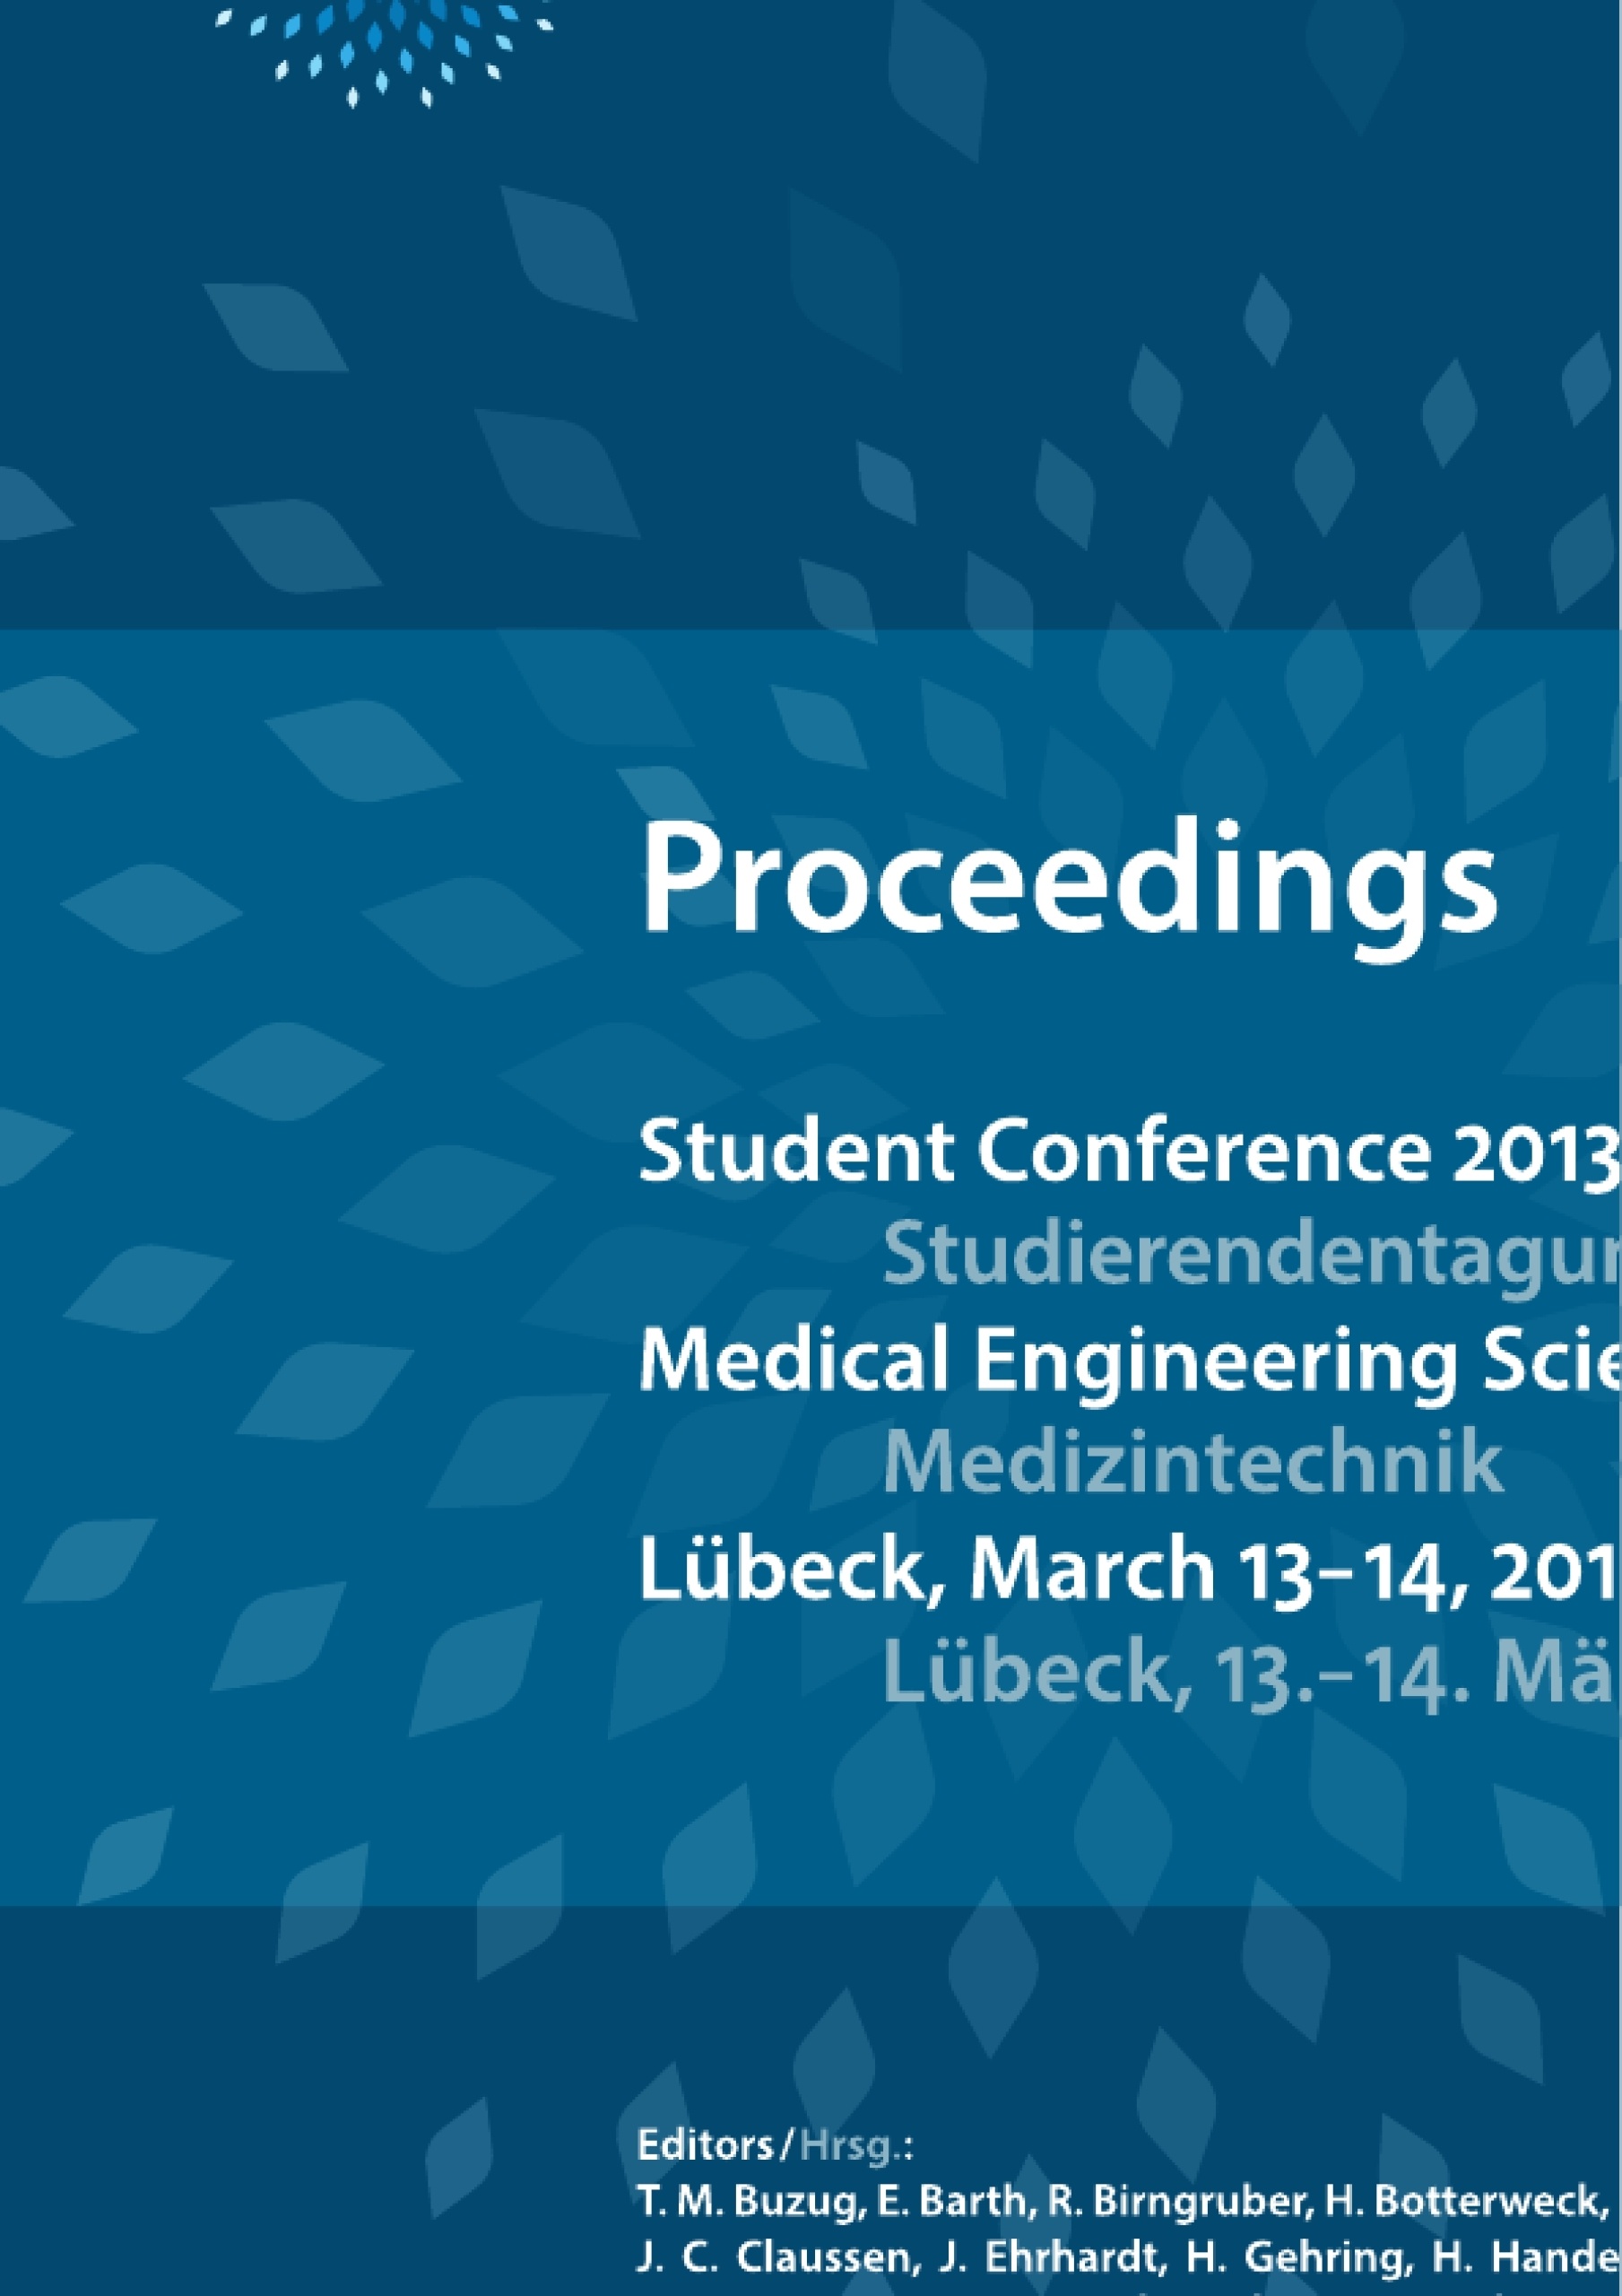 Title: Student Conference Medical Engineering Science 2013